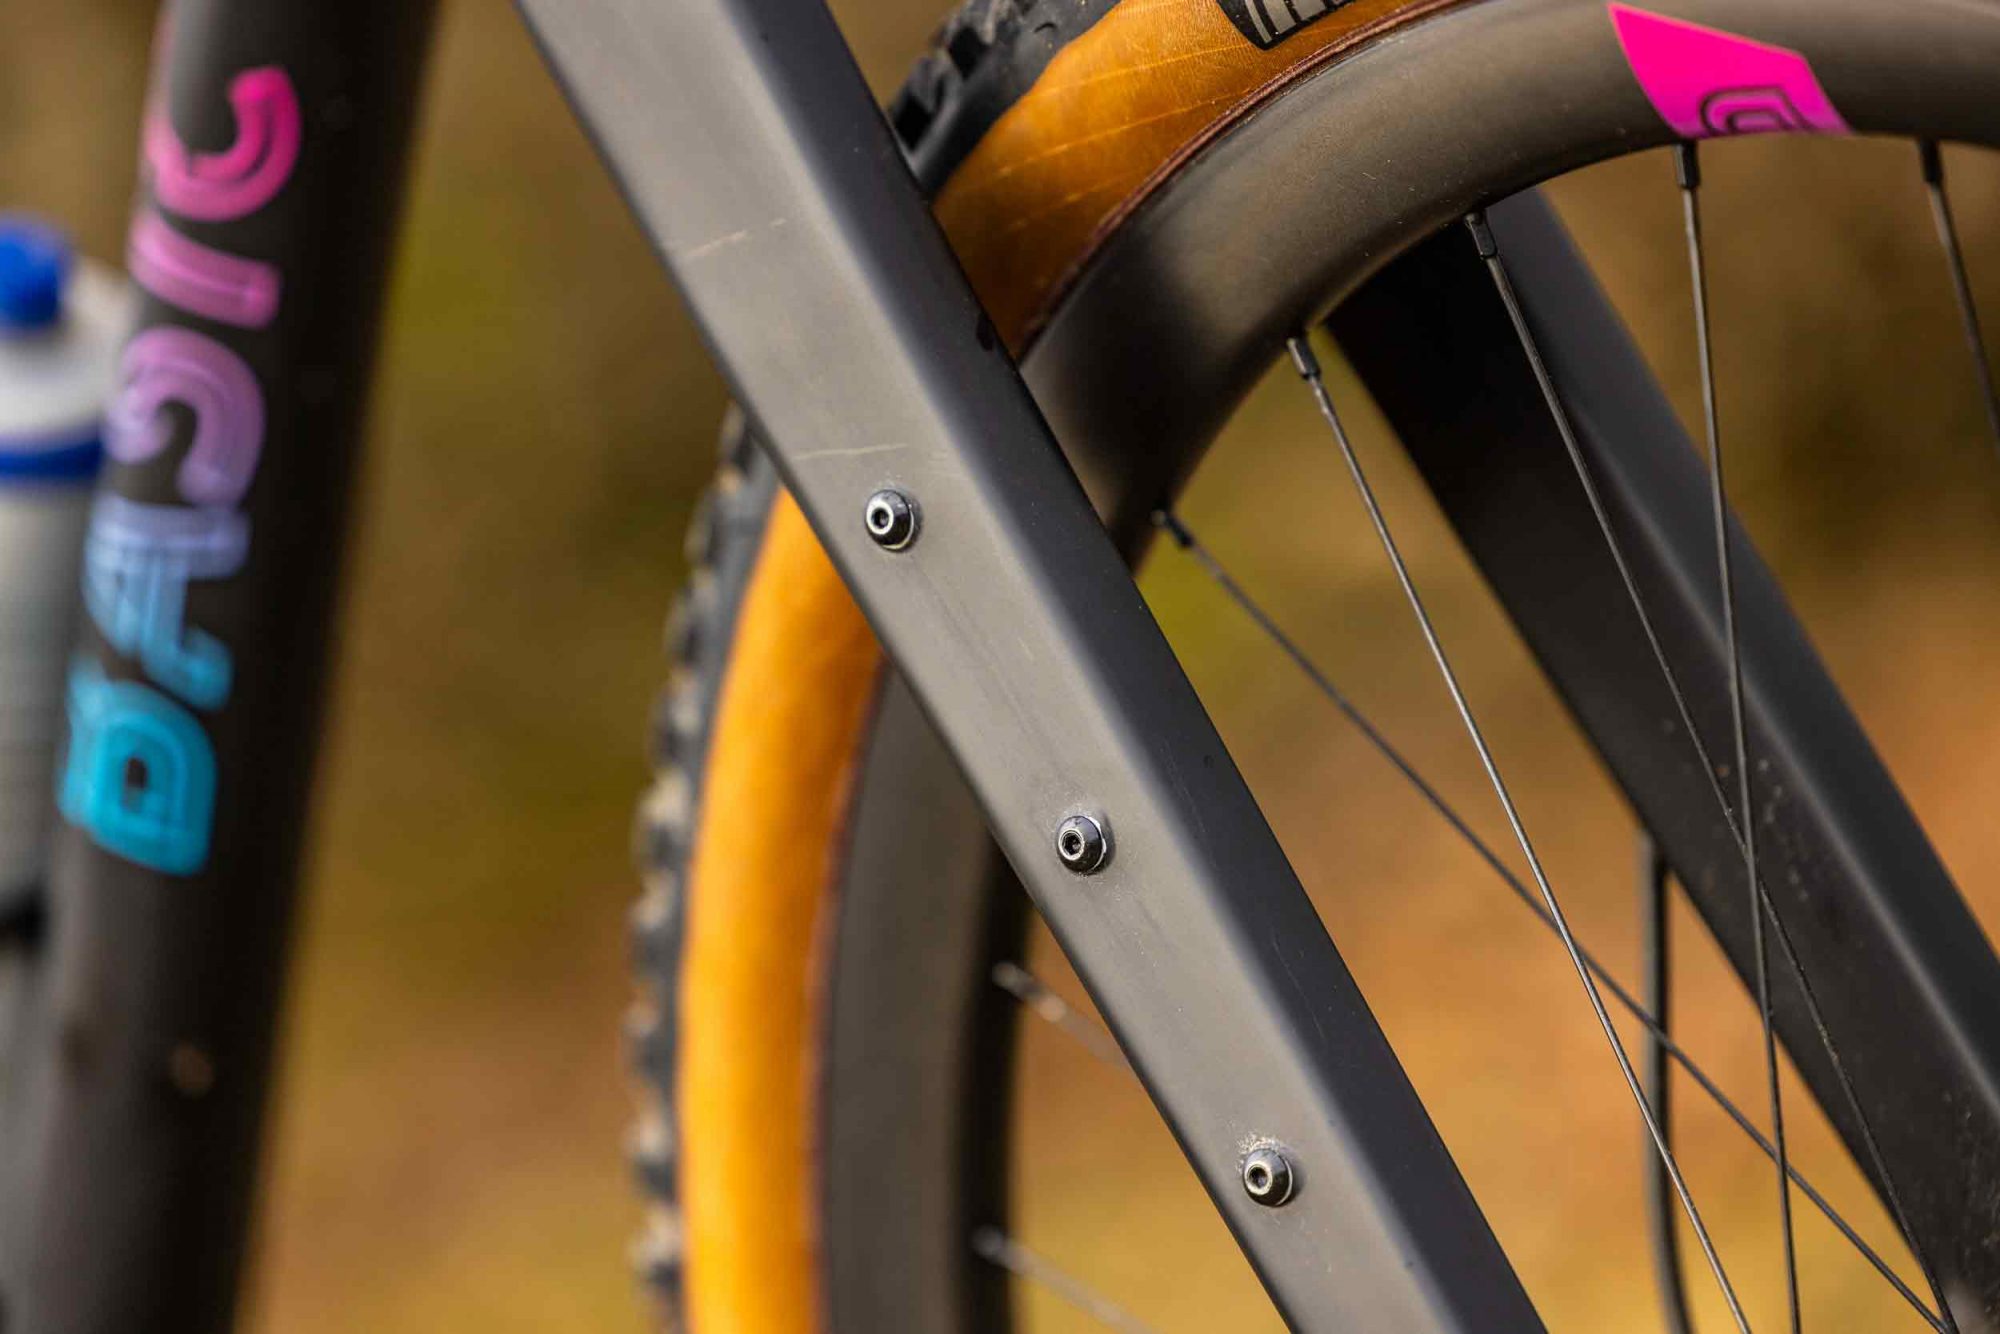 At least the fork has some threaded eyelets for bottle cages or transport cages.